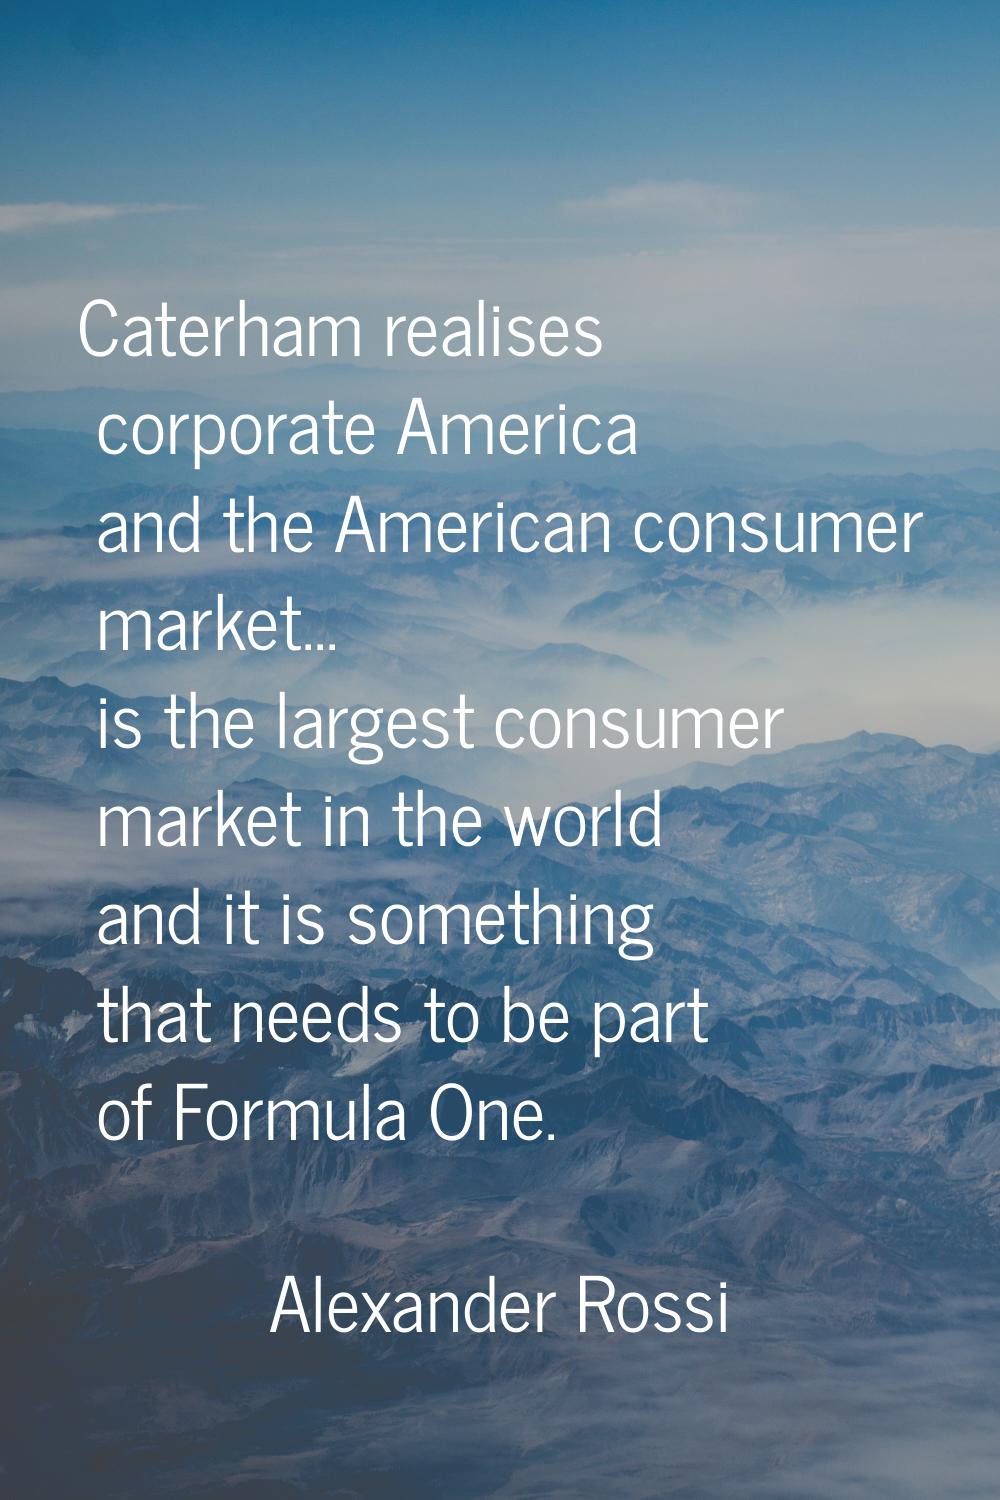 Caterham realises corporate America and the American consumer market... is the largest consumer mar